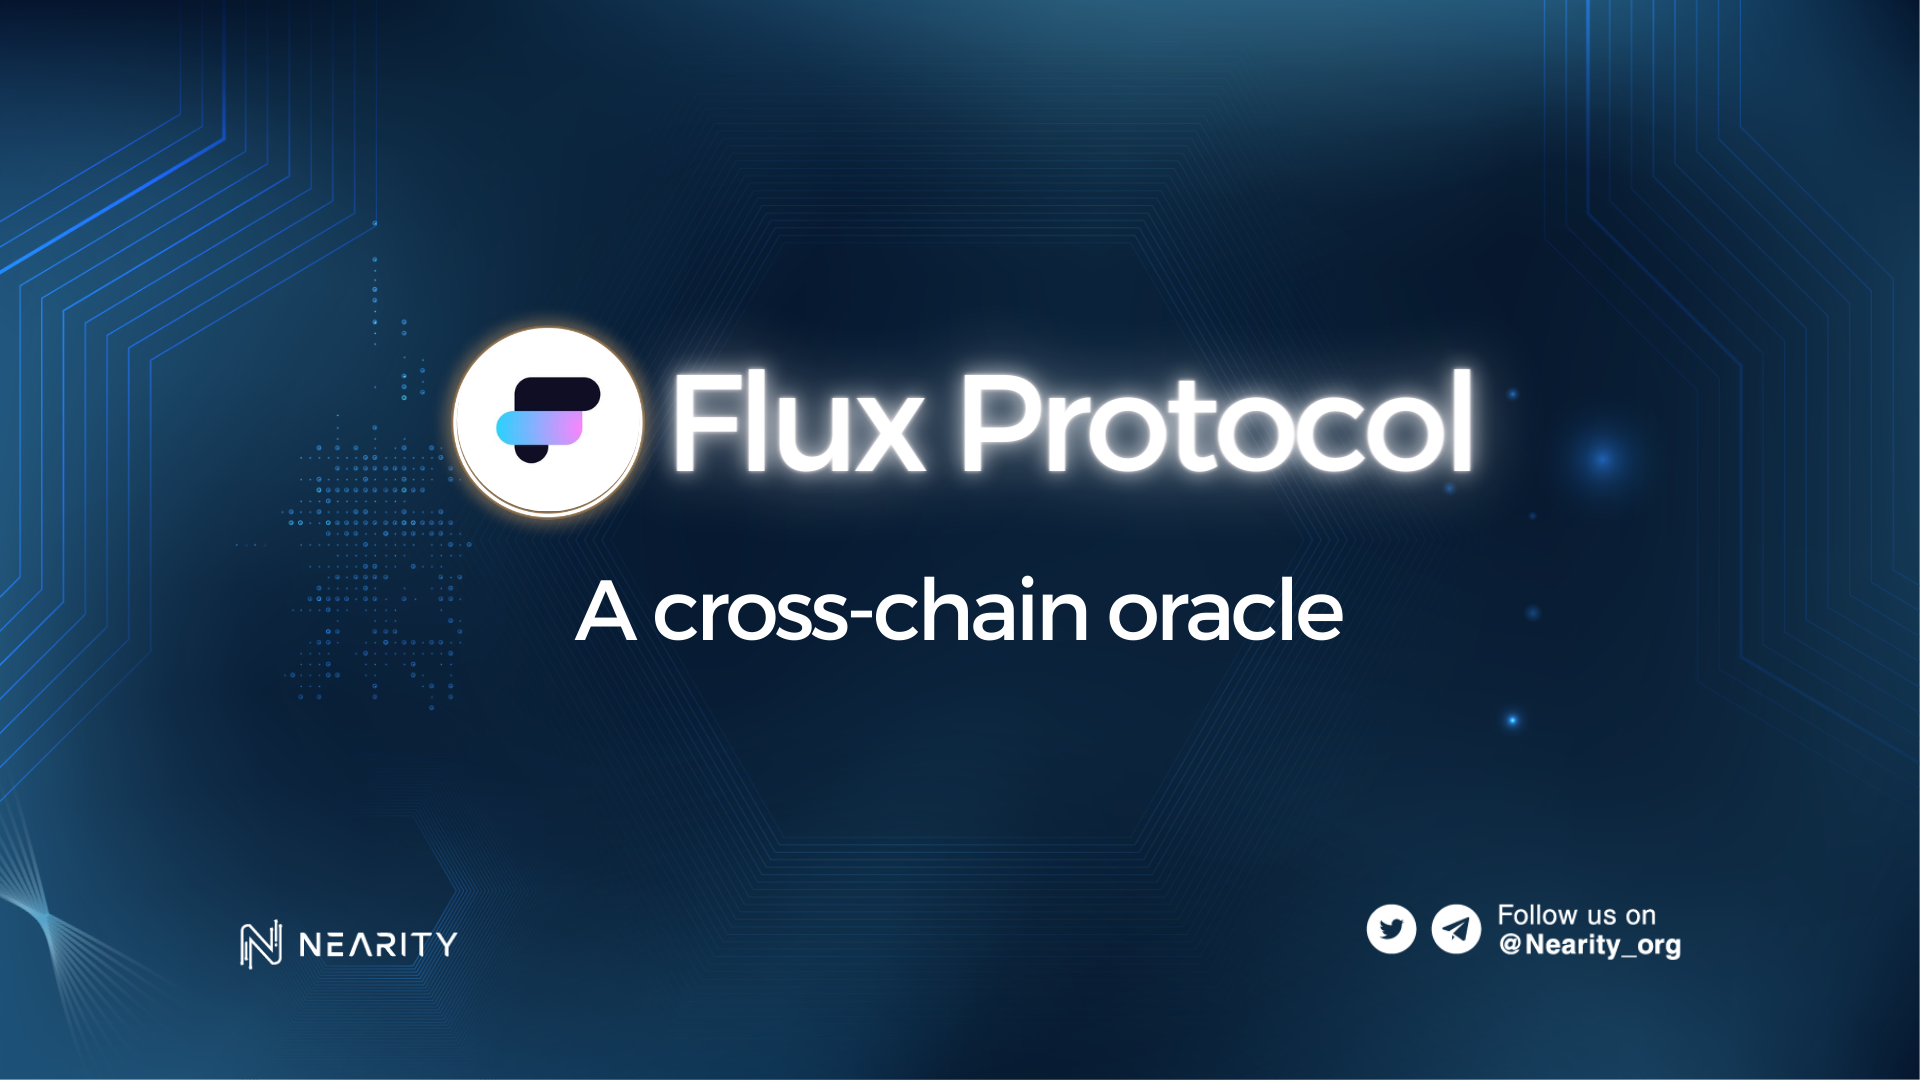 What's Flux Protocol